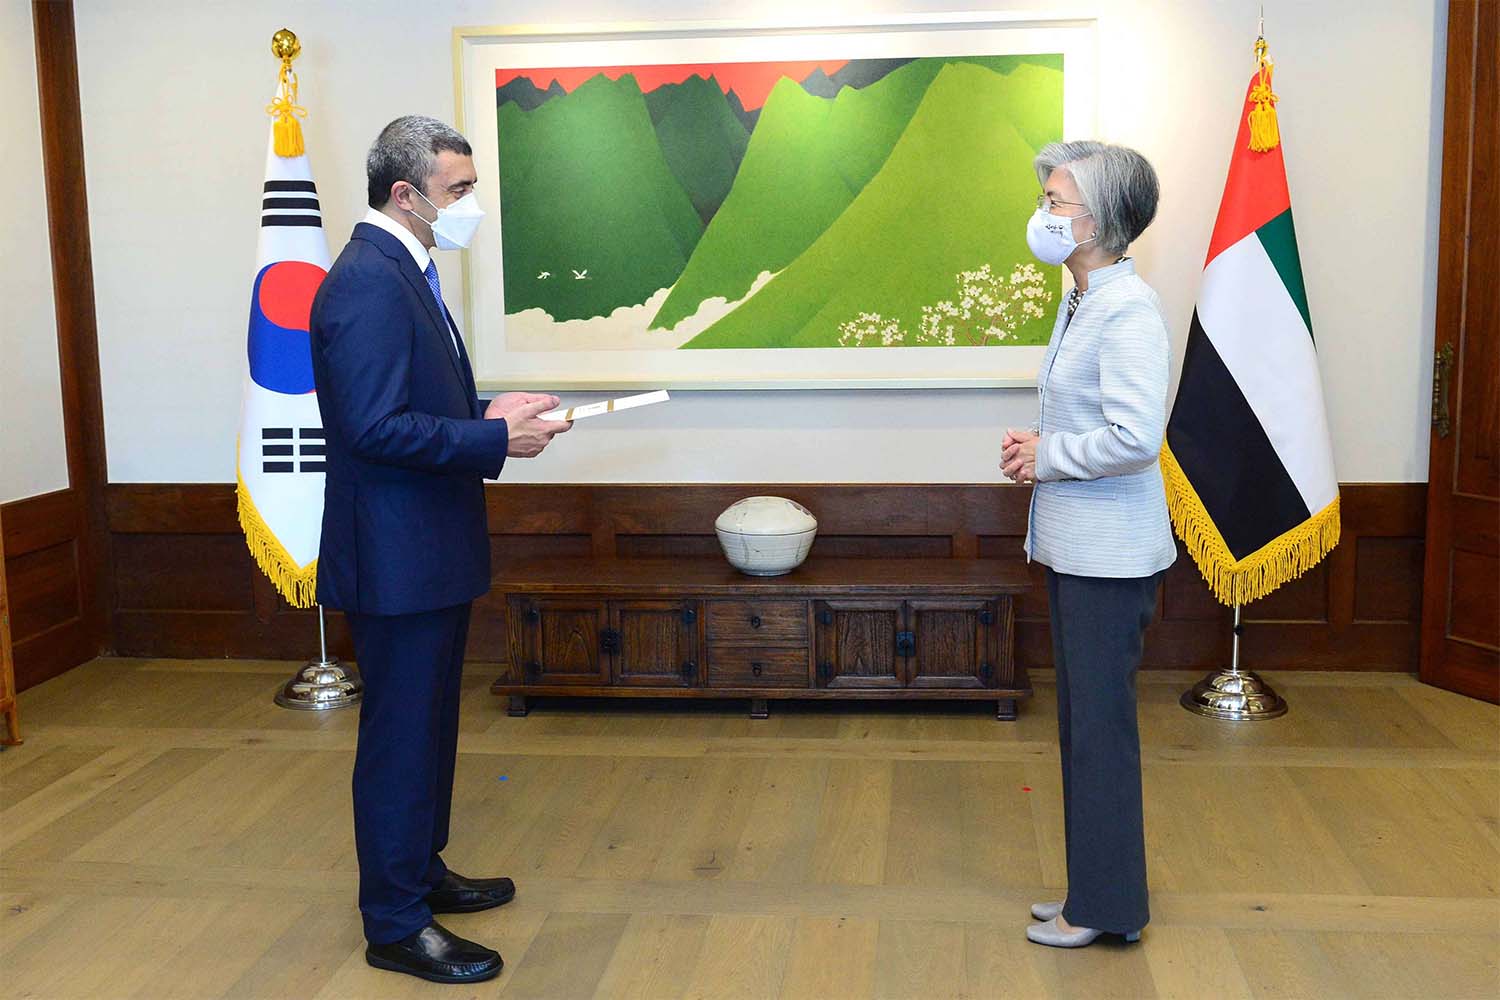 The deal will be South Korea's first free trade agreement with a country in the Middle East